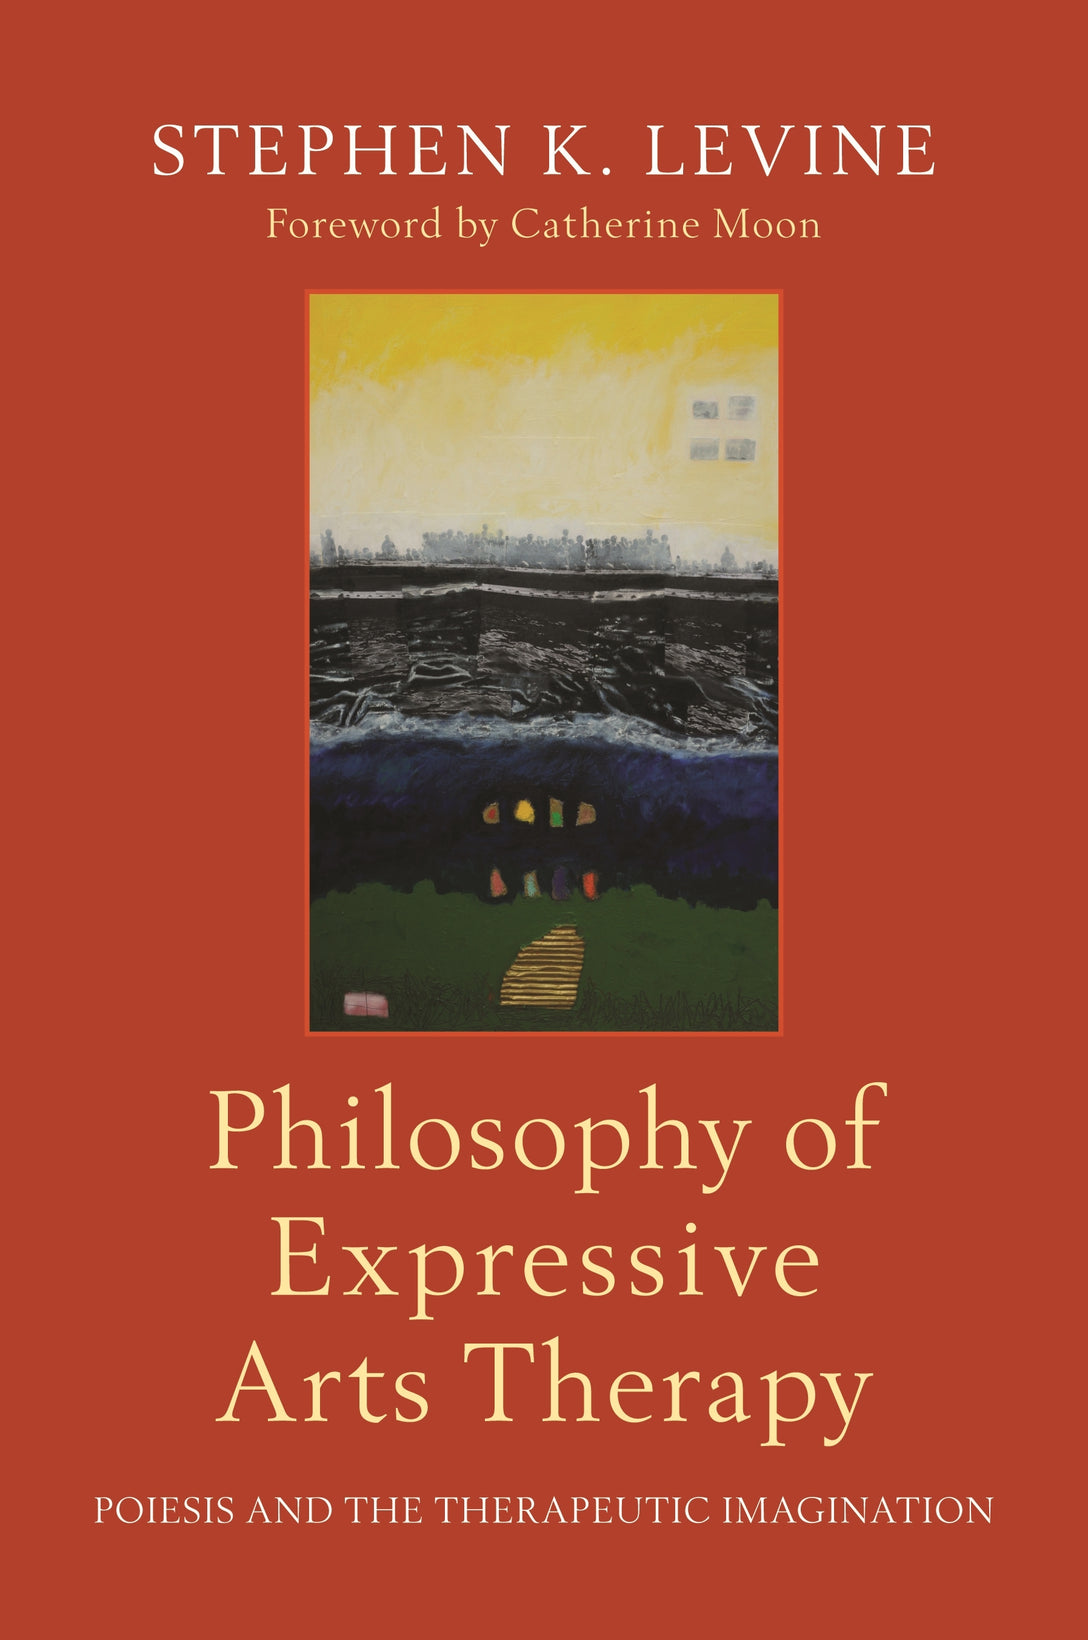 Philosophy of Expressive Arts Therapy by Stephen K. Levine, Catherine Hyland Moon